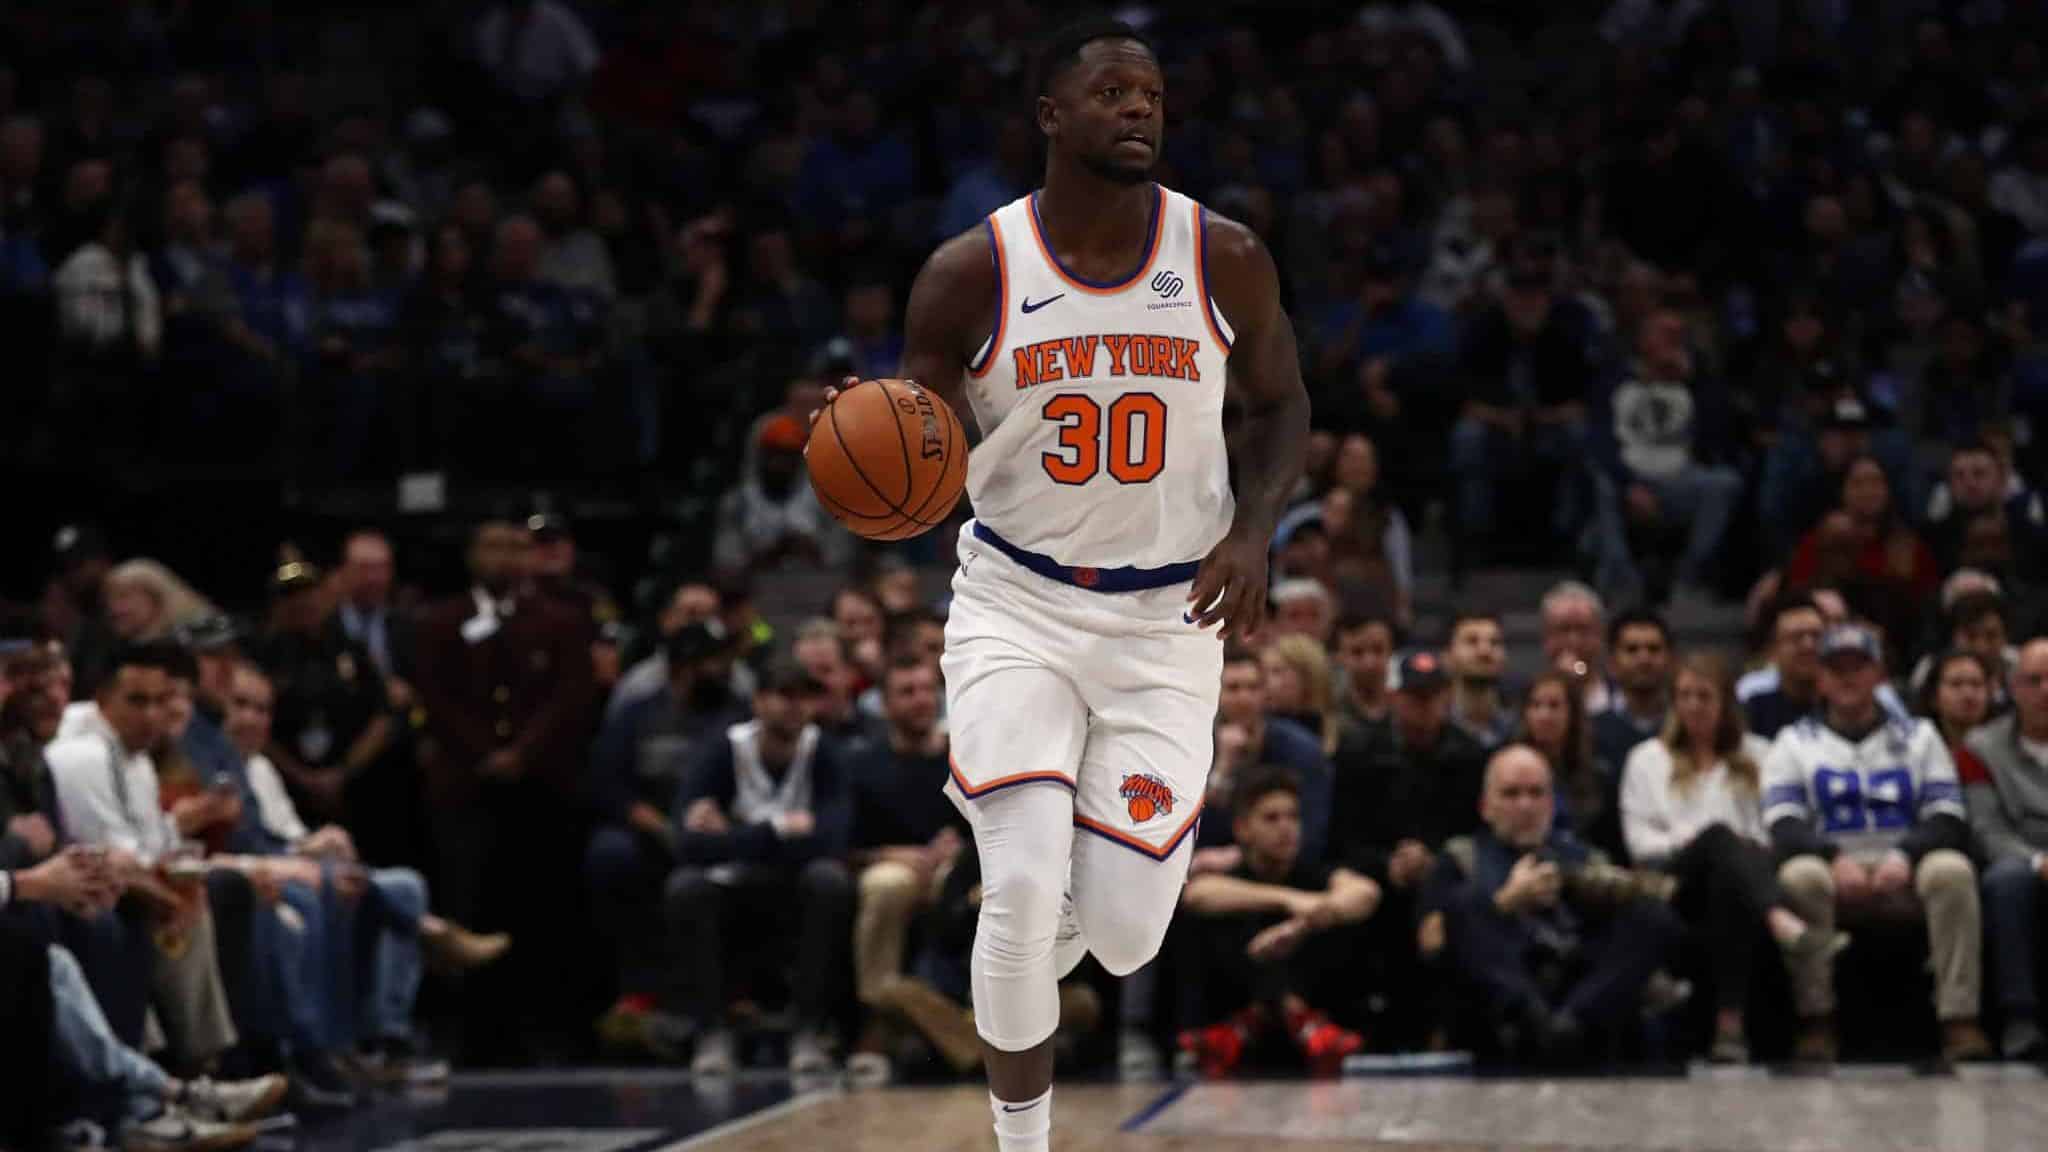 DALLAS, TEXAS - NOVEMBER 08: Julius Randle #30 of the New York Knicks at American Airlines Center on November 08, 2019 in Dallas, Texas.